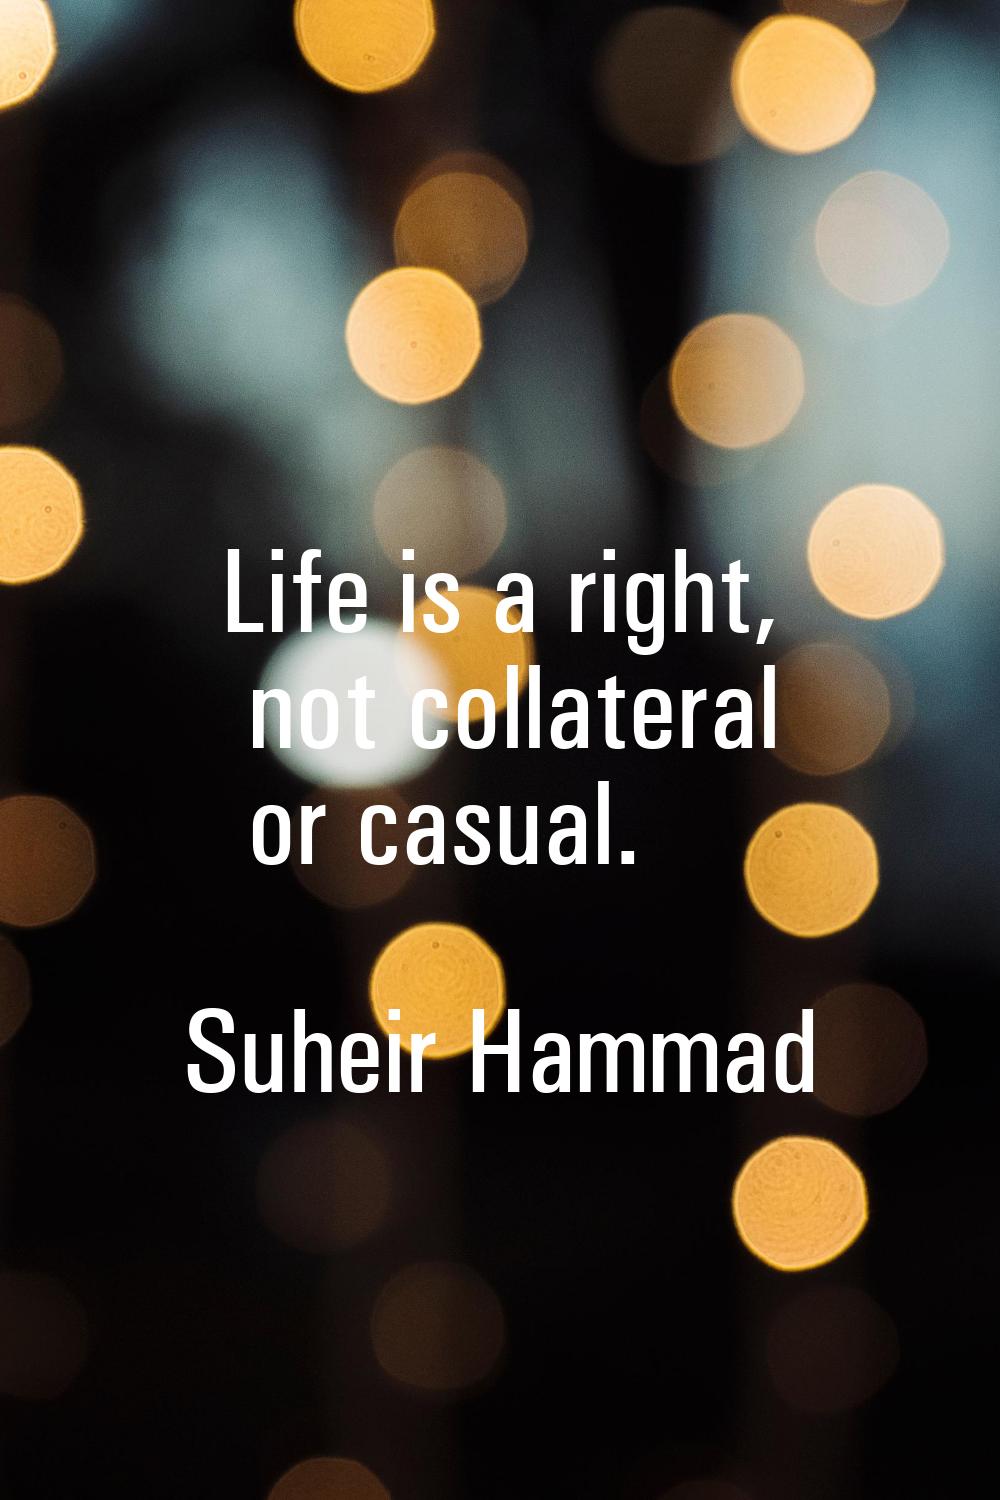 Life is a right, not collateral or casual.